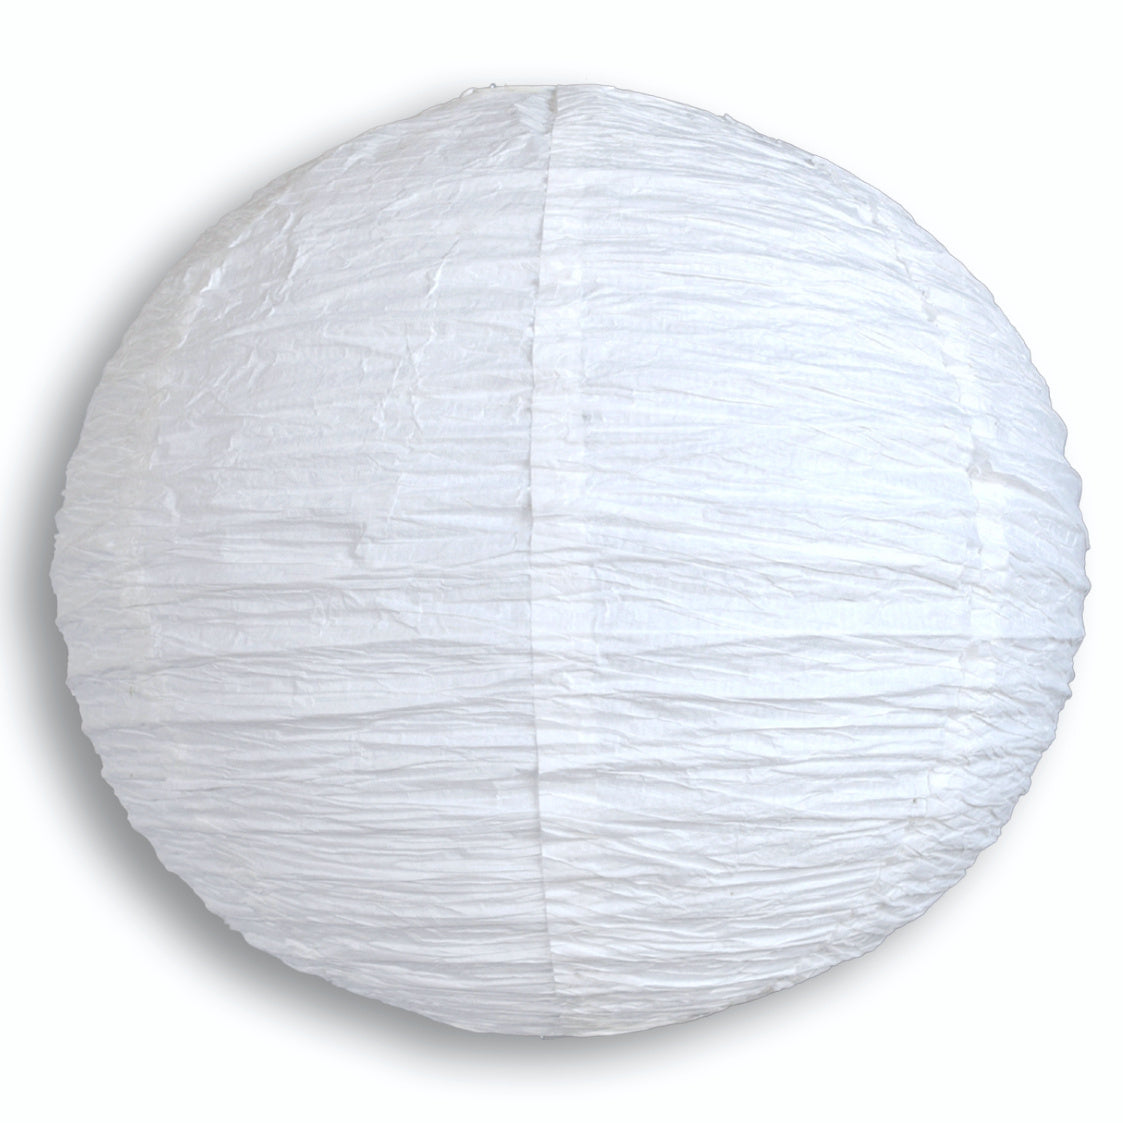 20&quot; White Round Crepe Paper Lantern, Even Ribbing, Chinese Hanging Wedding &amp; Party Decoration